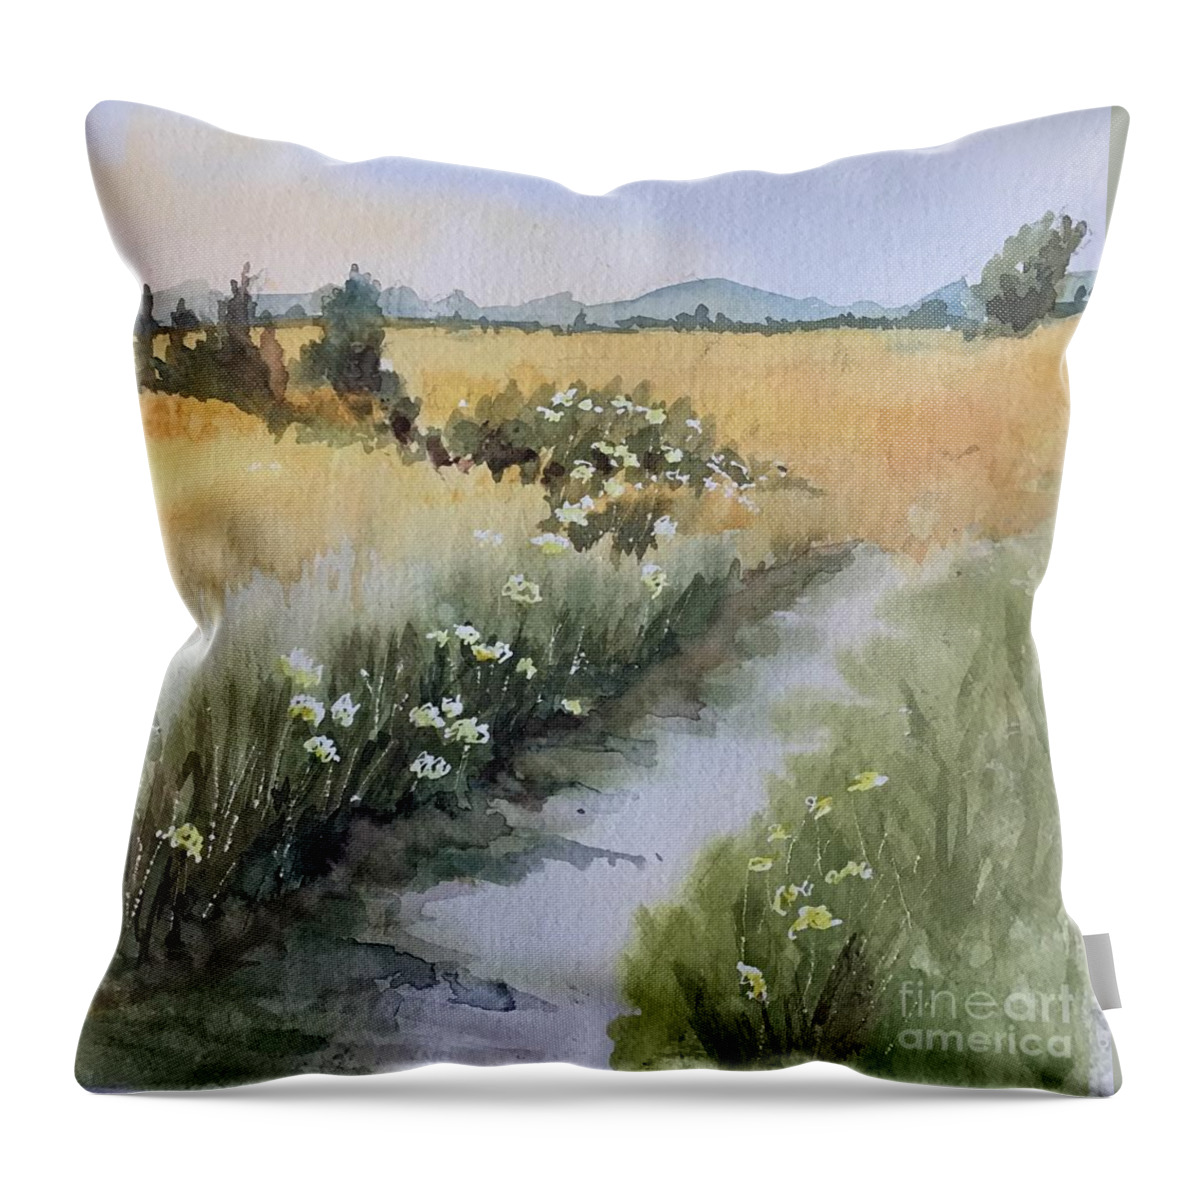 Canadian Cascades Throw Pillow featuring the painting Looking Towards the Canadian Cascades by Watercolor Meditations